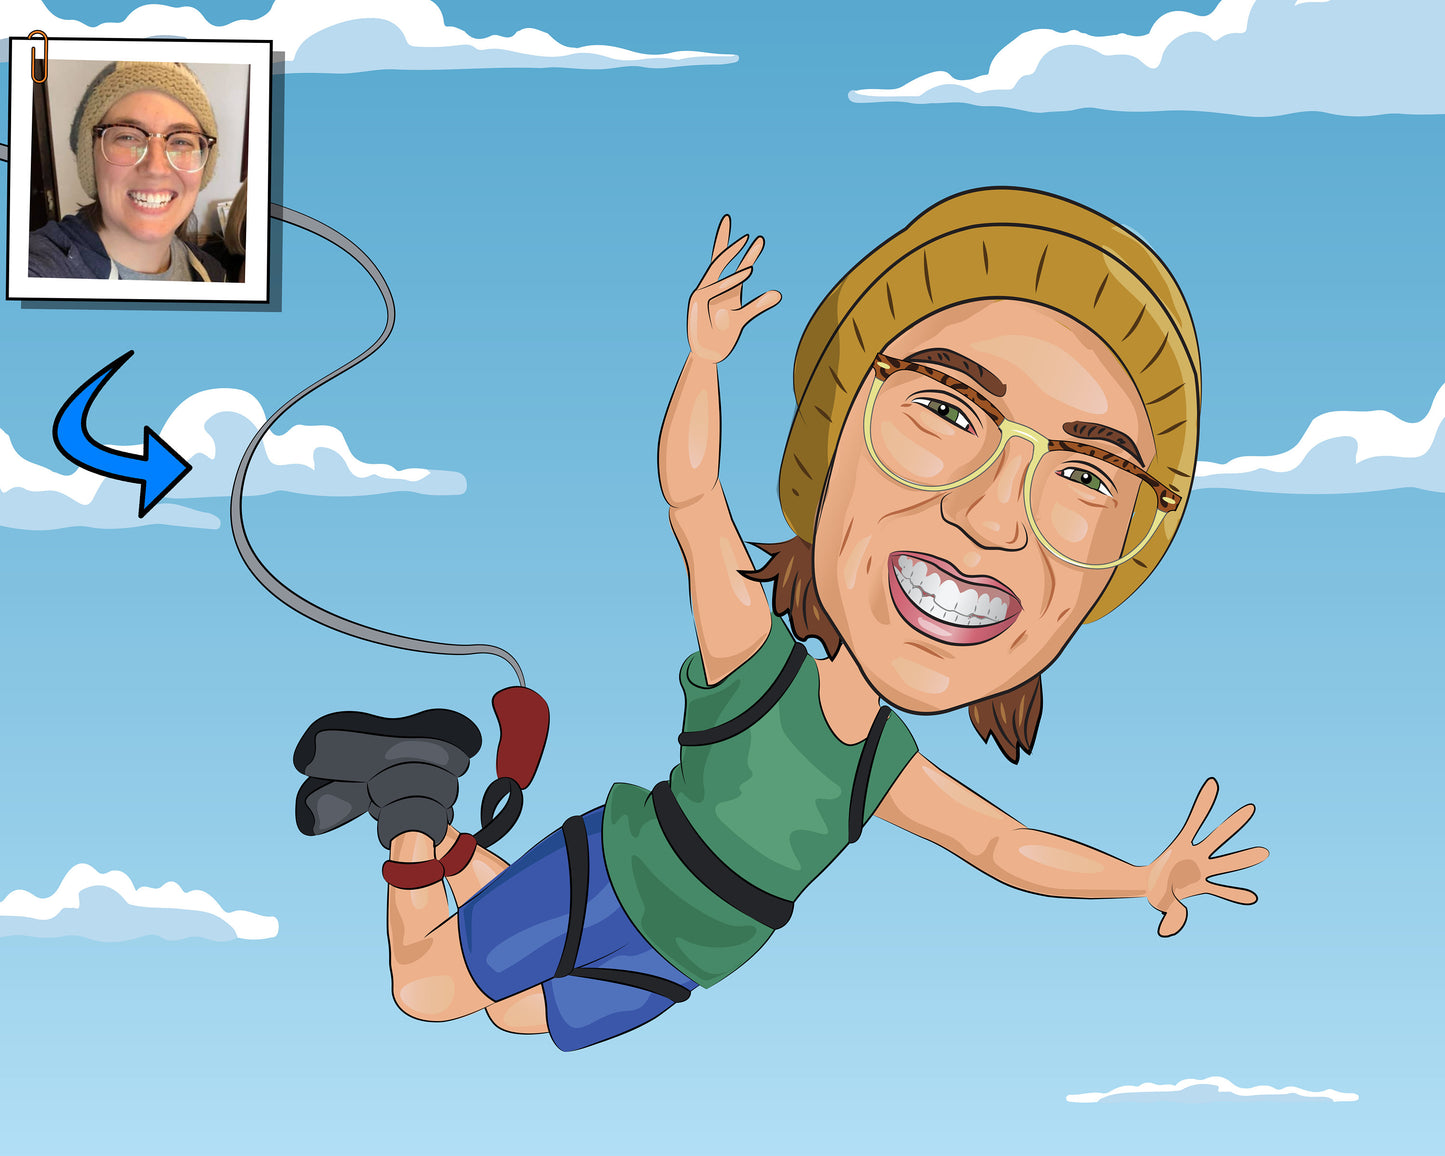 Bungee Jumping Gift - Custom Caricature From Photo, Bungee Jumper gift, Base Jump